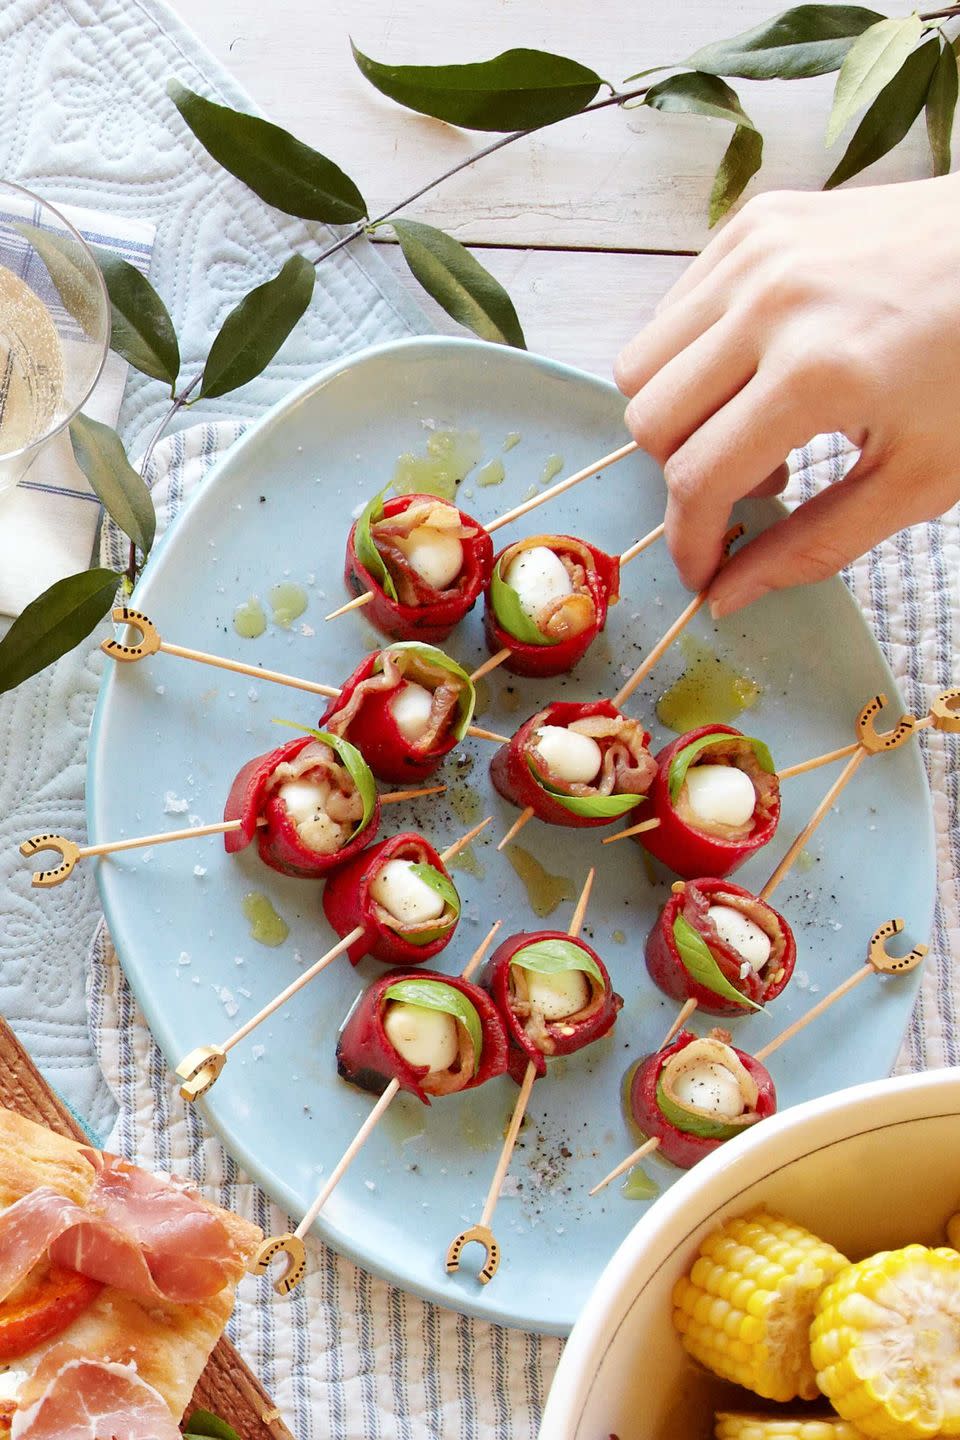 63) Mozzarella, Red Pepper, and Bacon Skewers